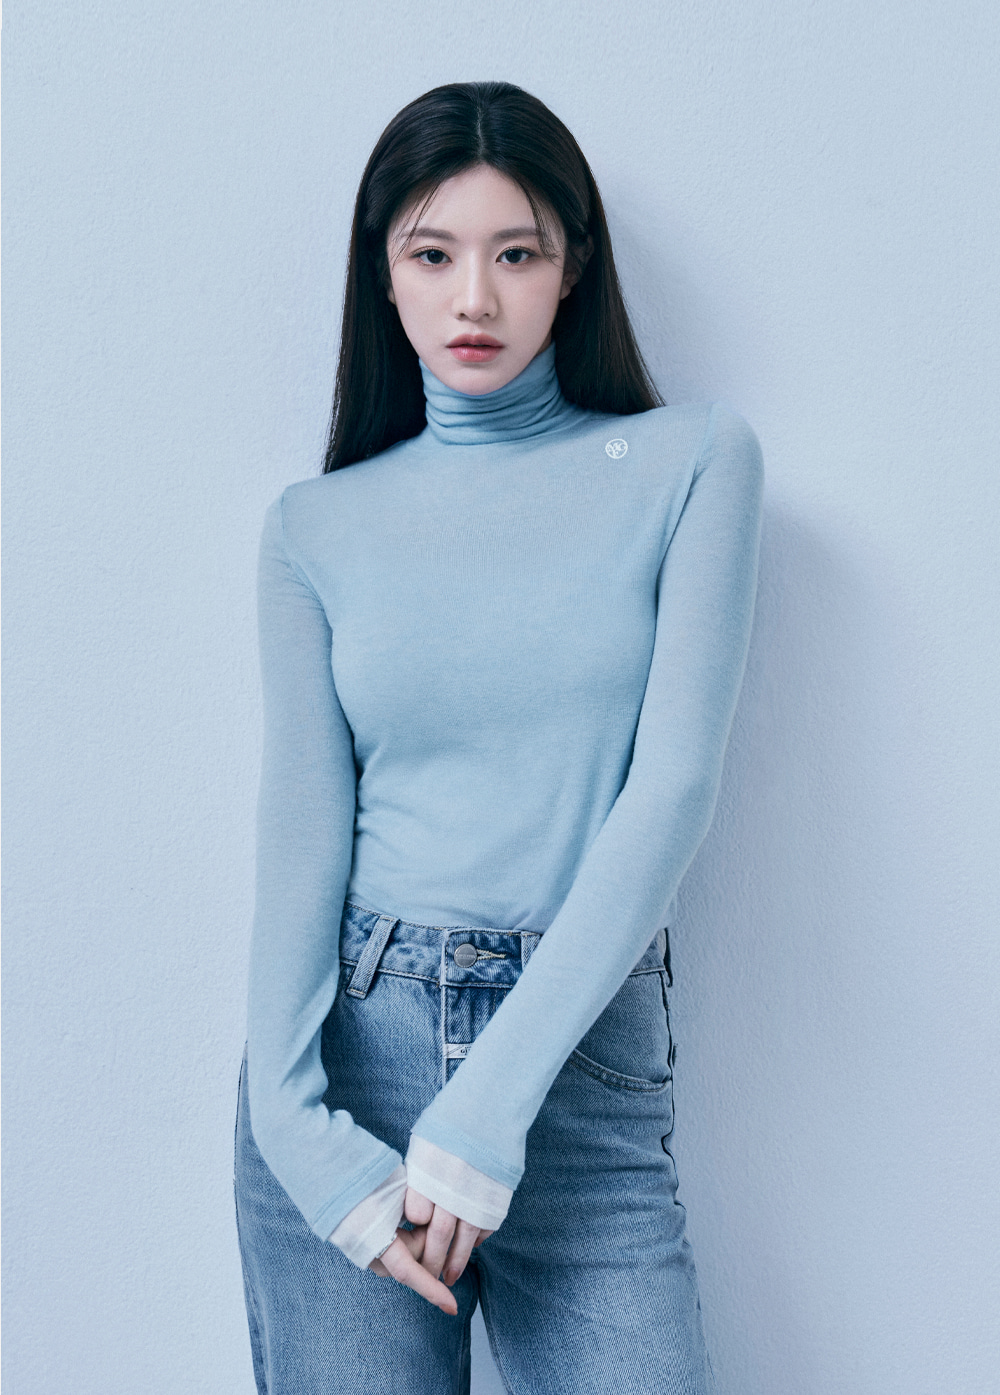 W LAYERED POINT TURTLE NECK LONG SLEEVE light blue